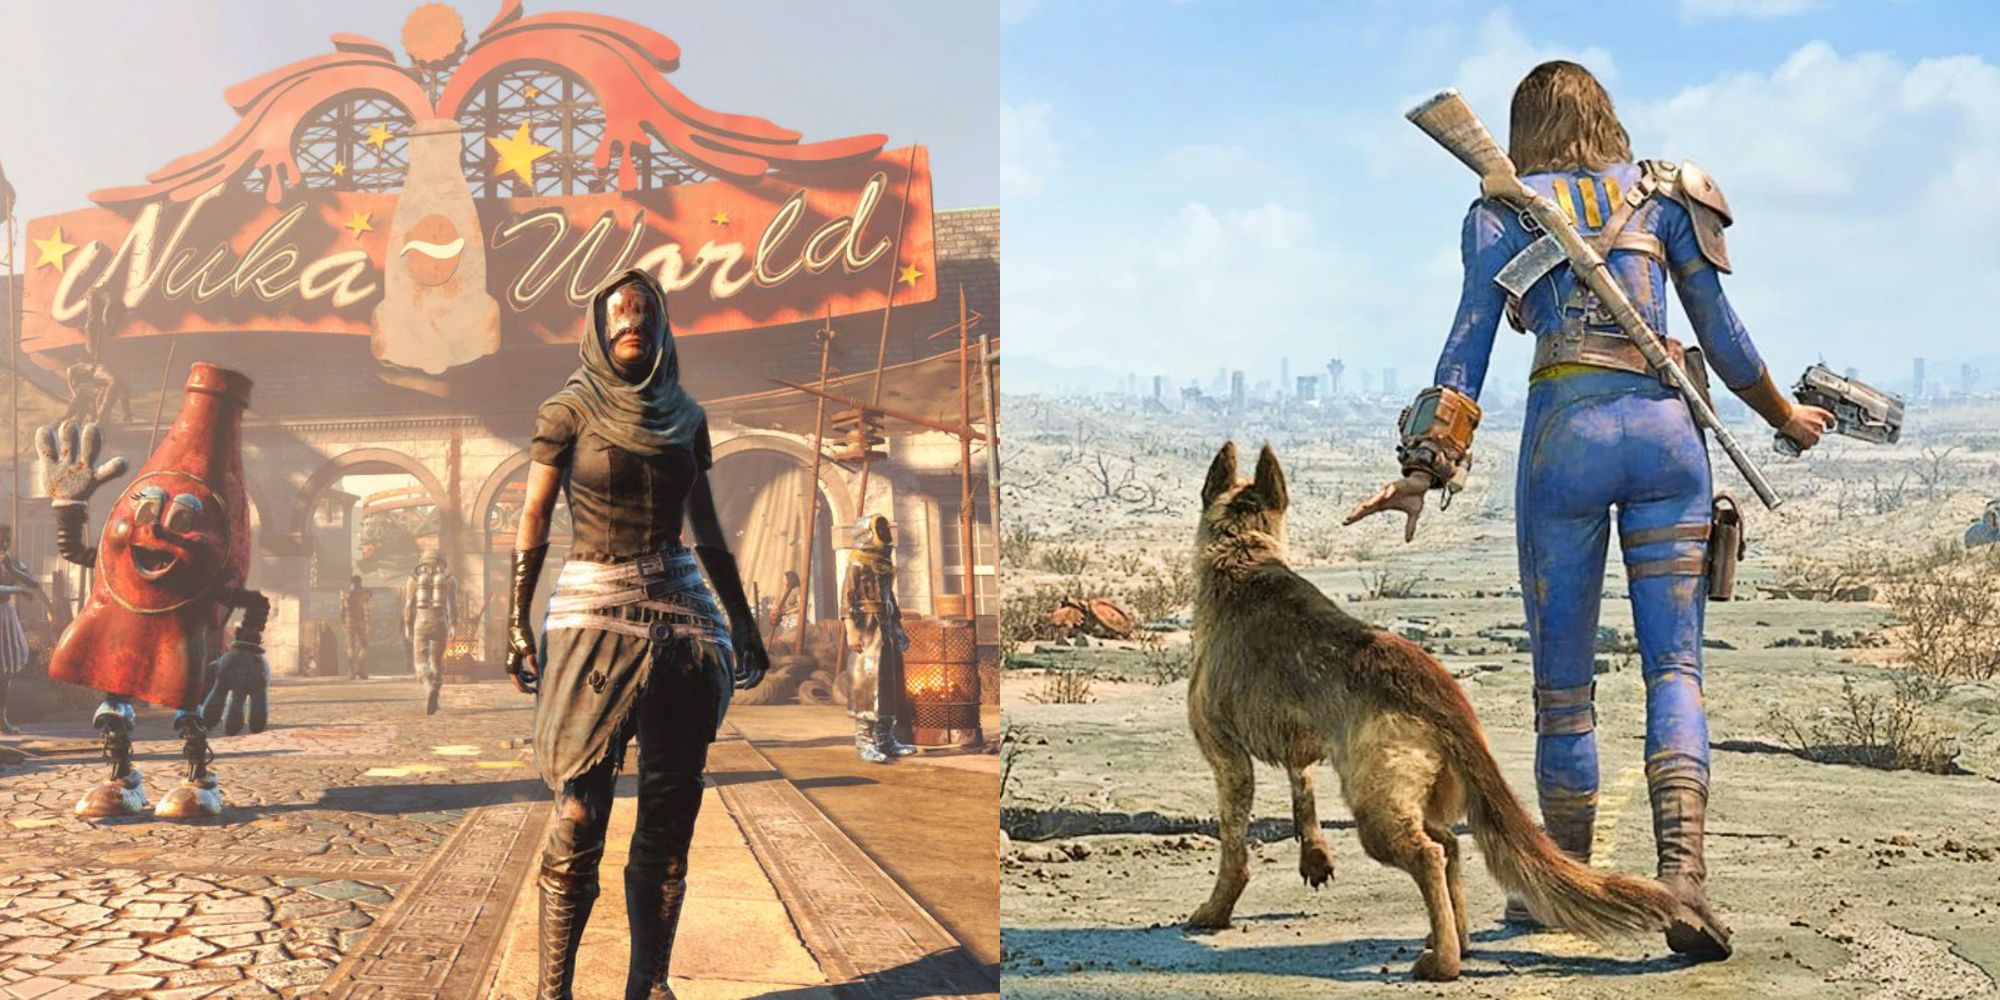 Two images from Fallout 4